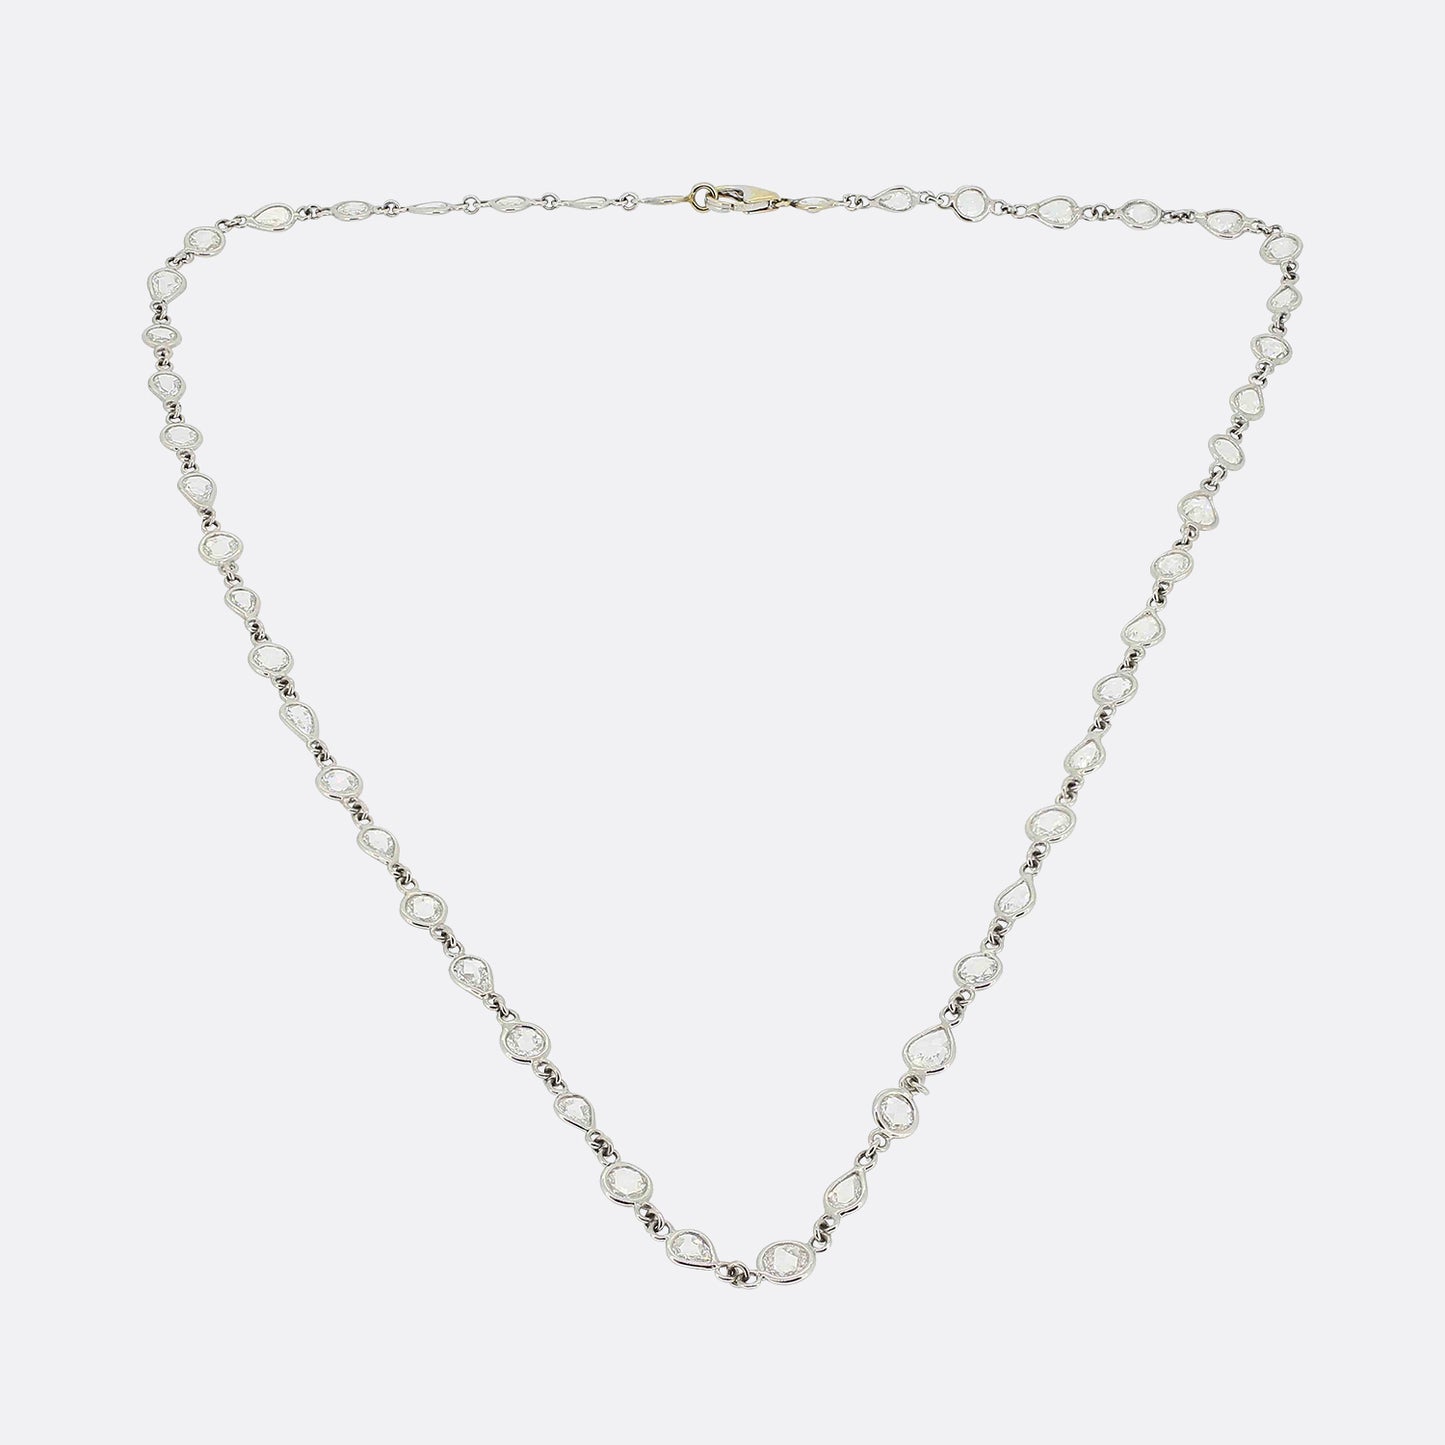 5.36 Carat Diamonds By The Yard Necklace